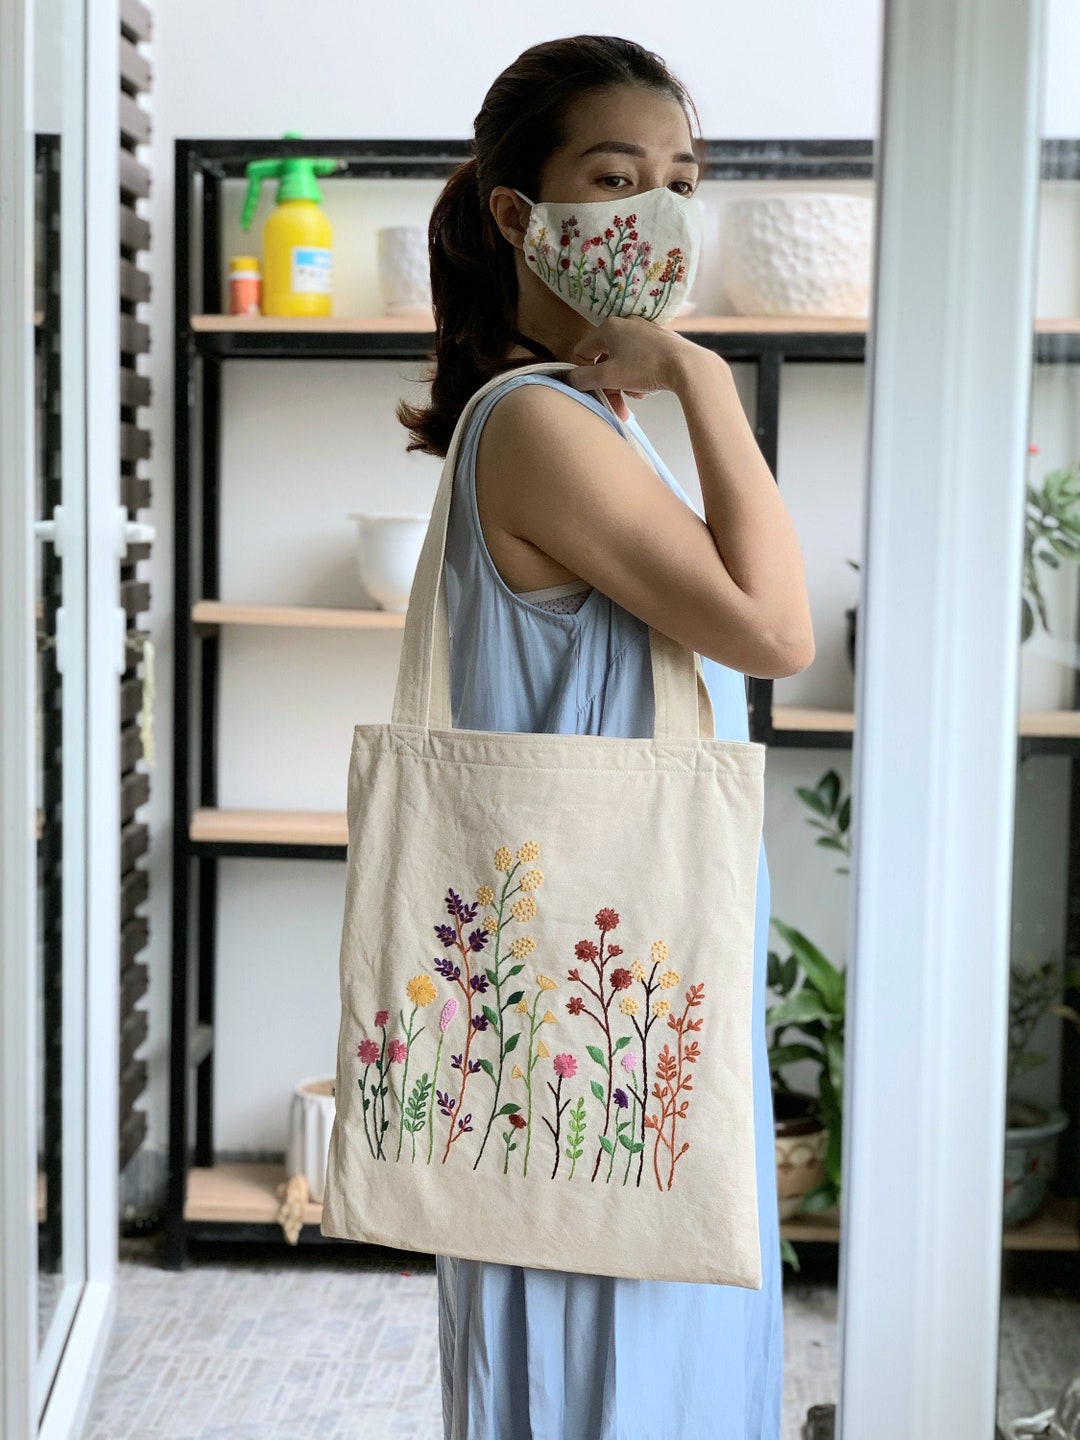 Embroidered Daisy Tote Bag,linen Tote Bags for Women,embroidery